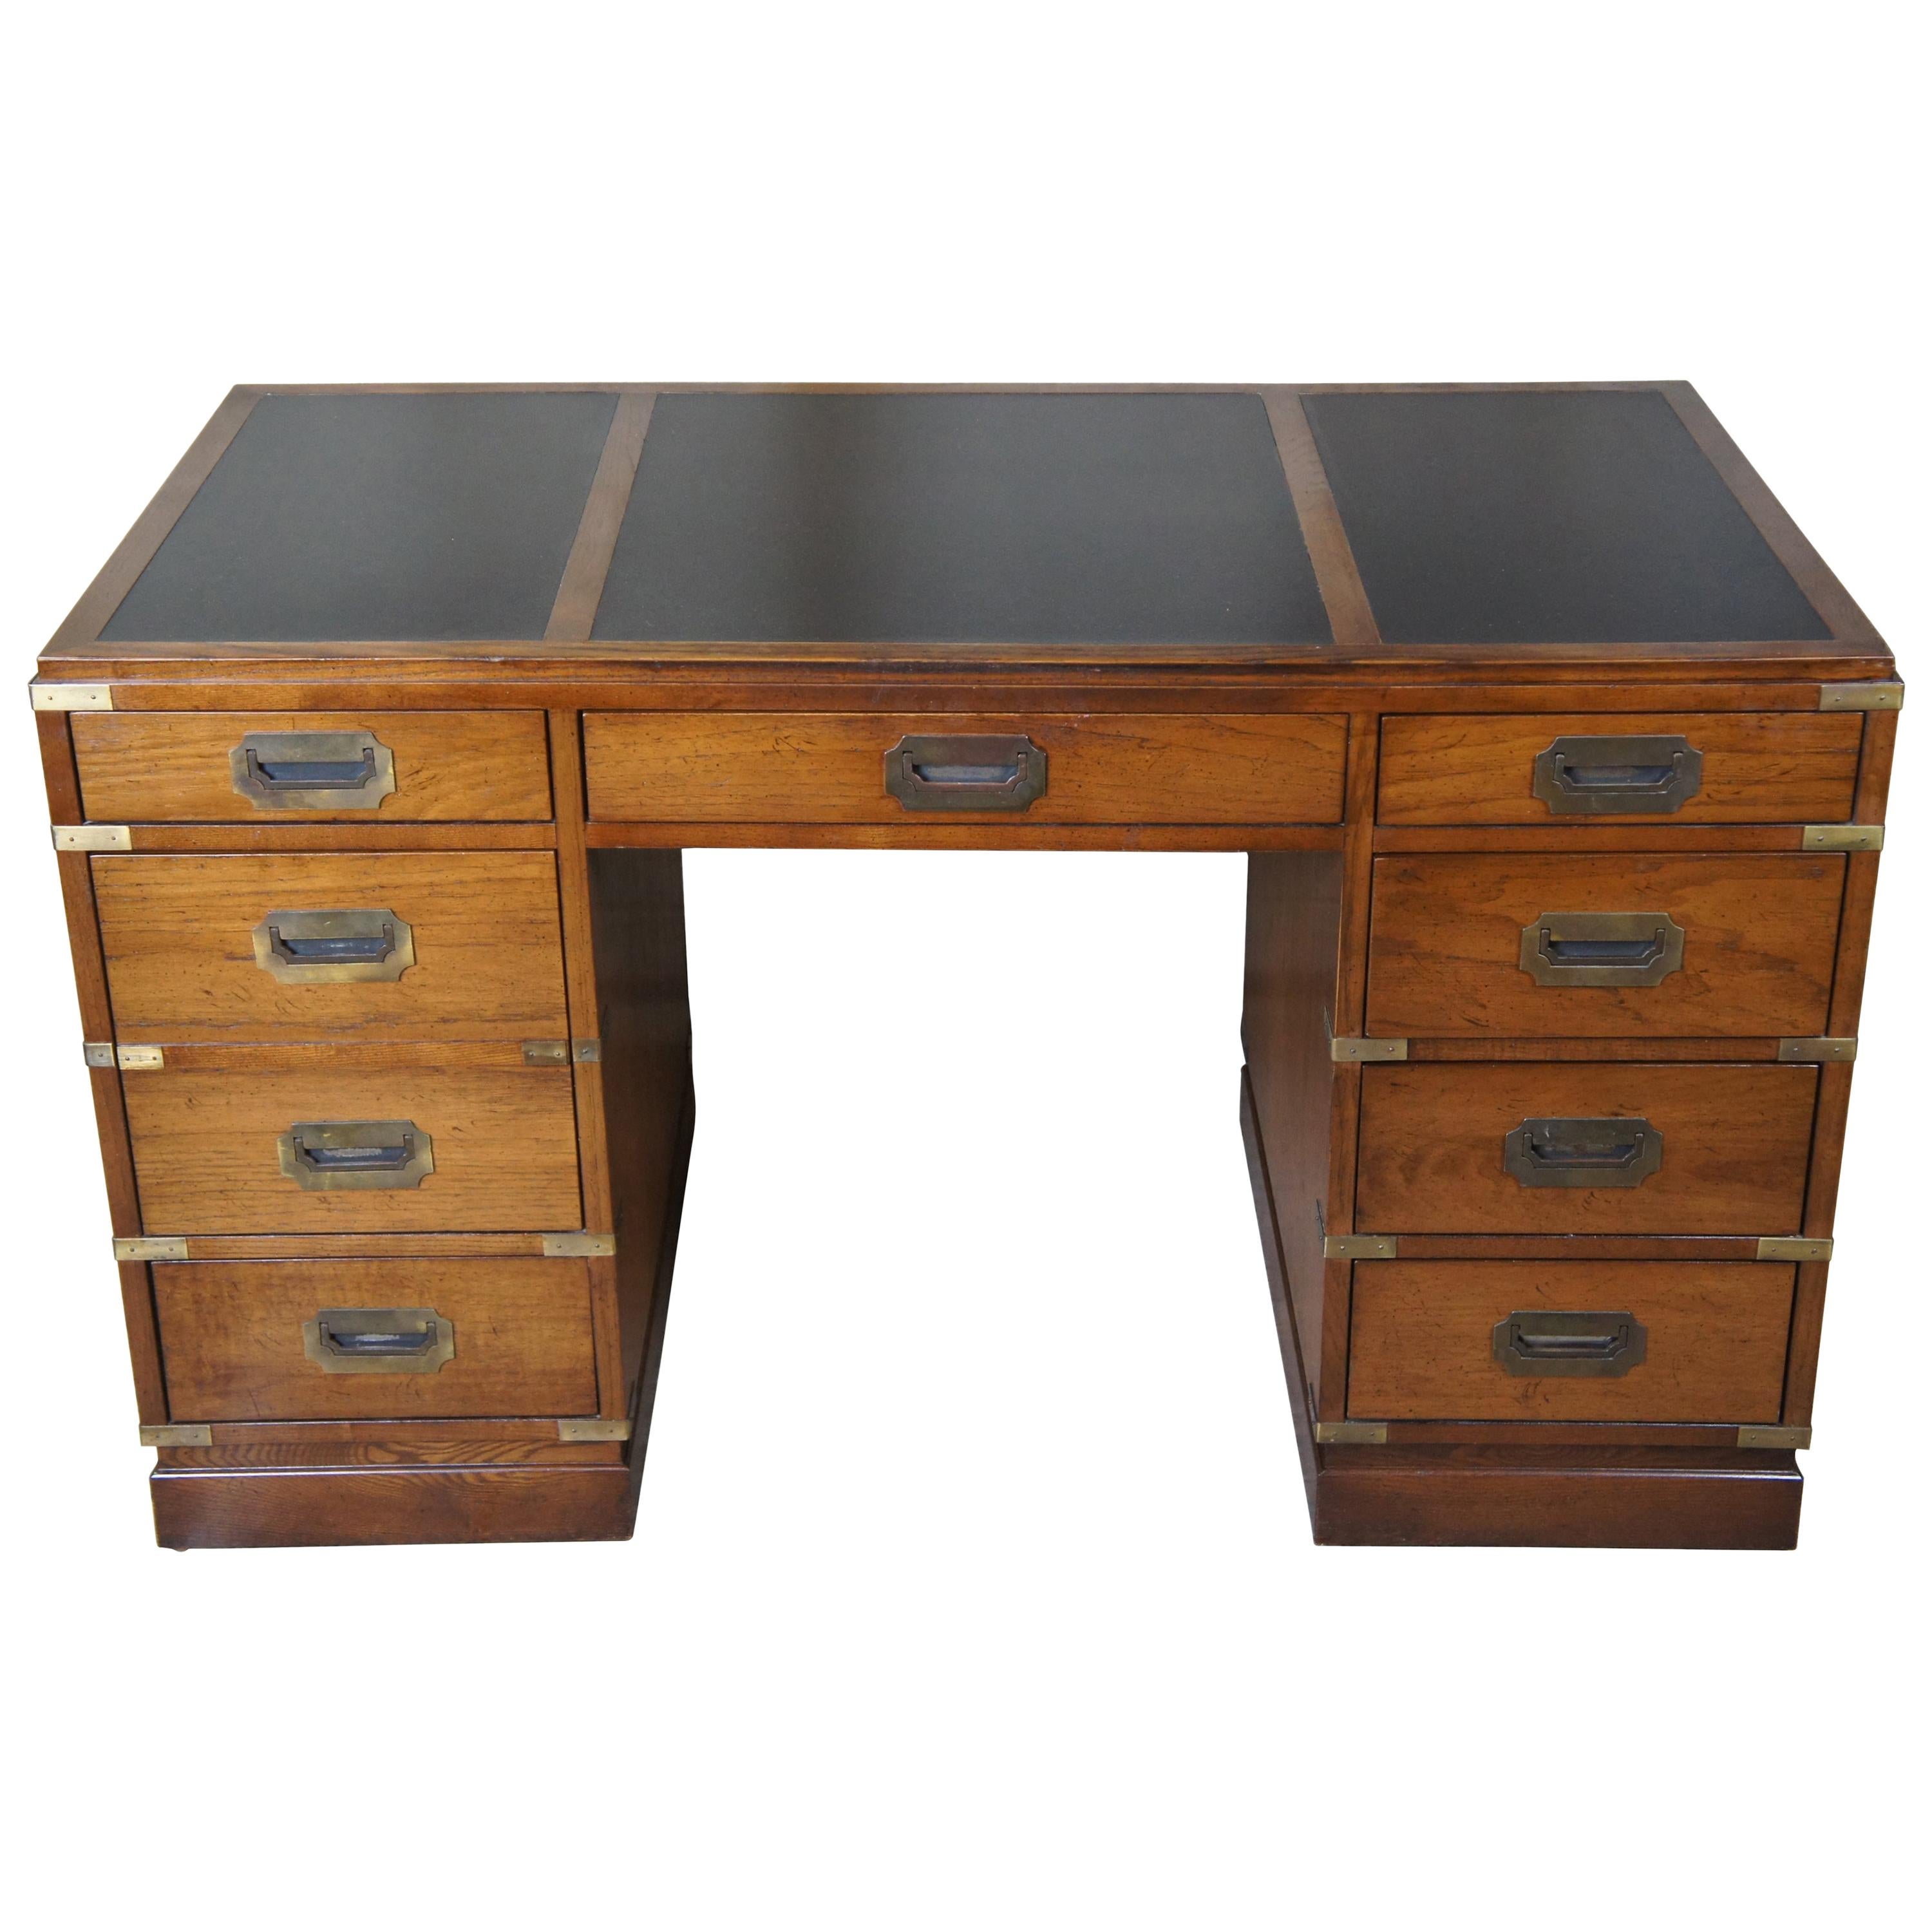 1975 Sligh Oak and Brass Leather Top Campaign Style Writing Desk